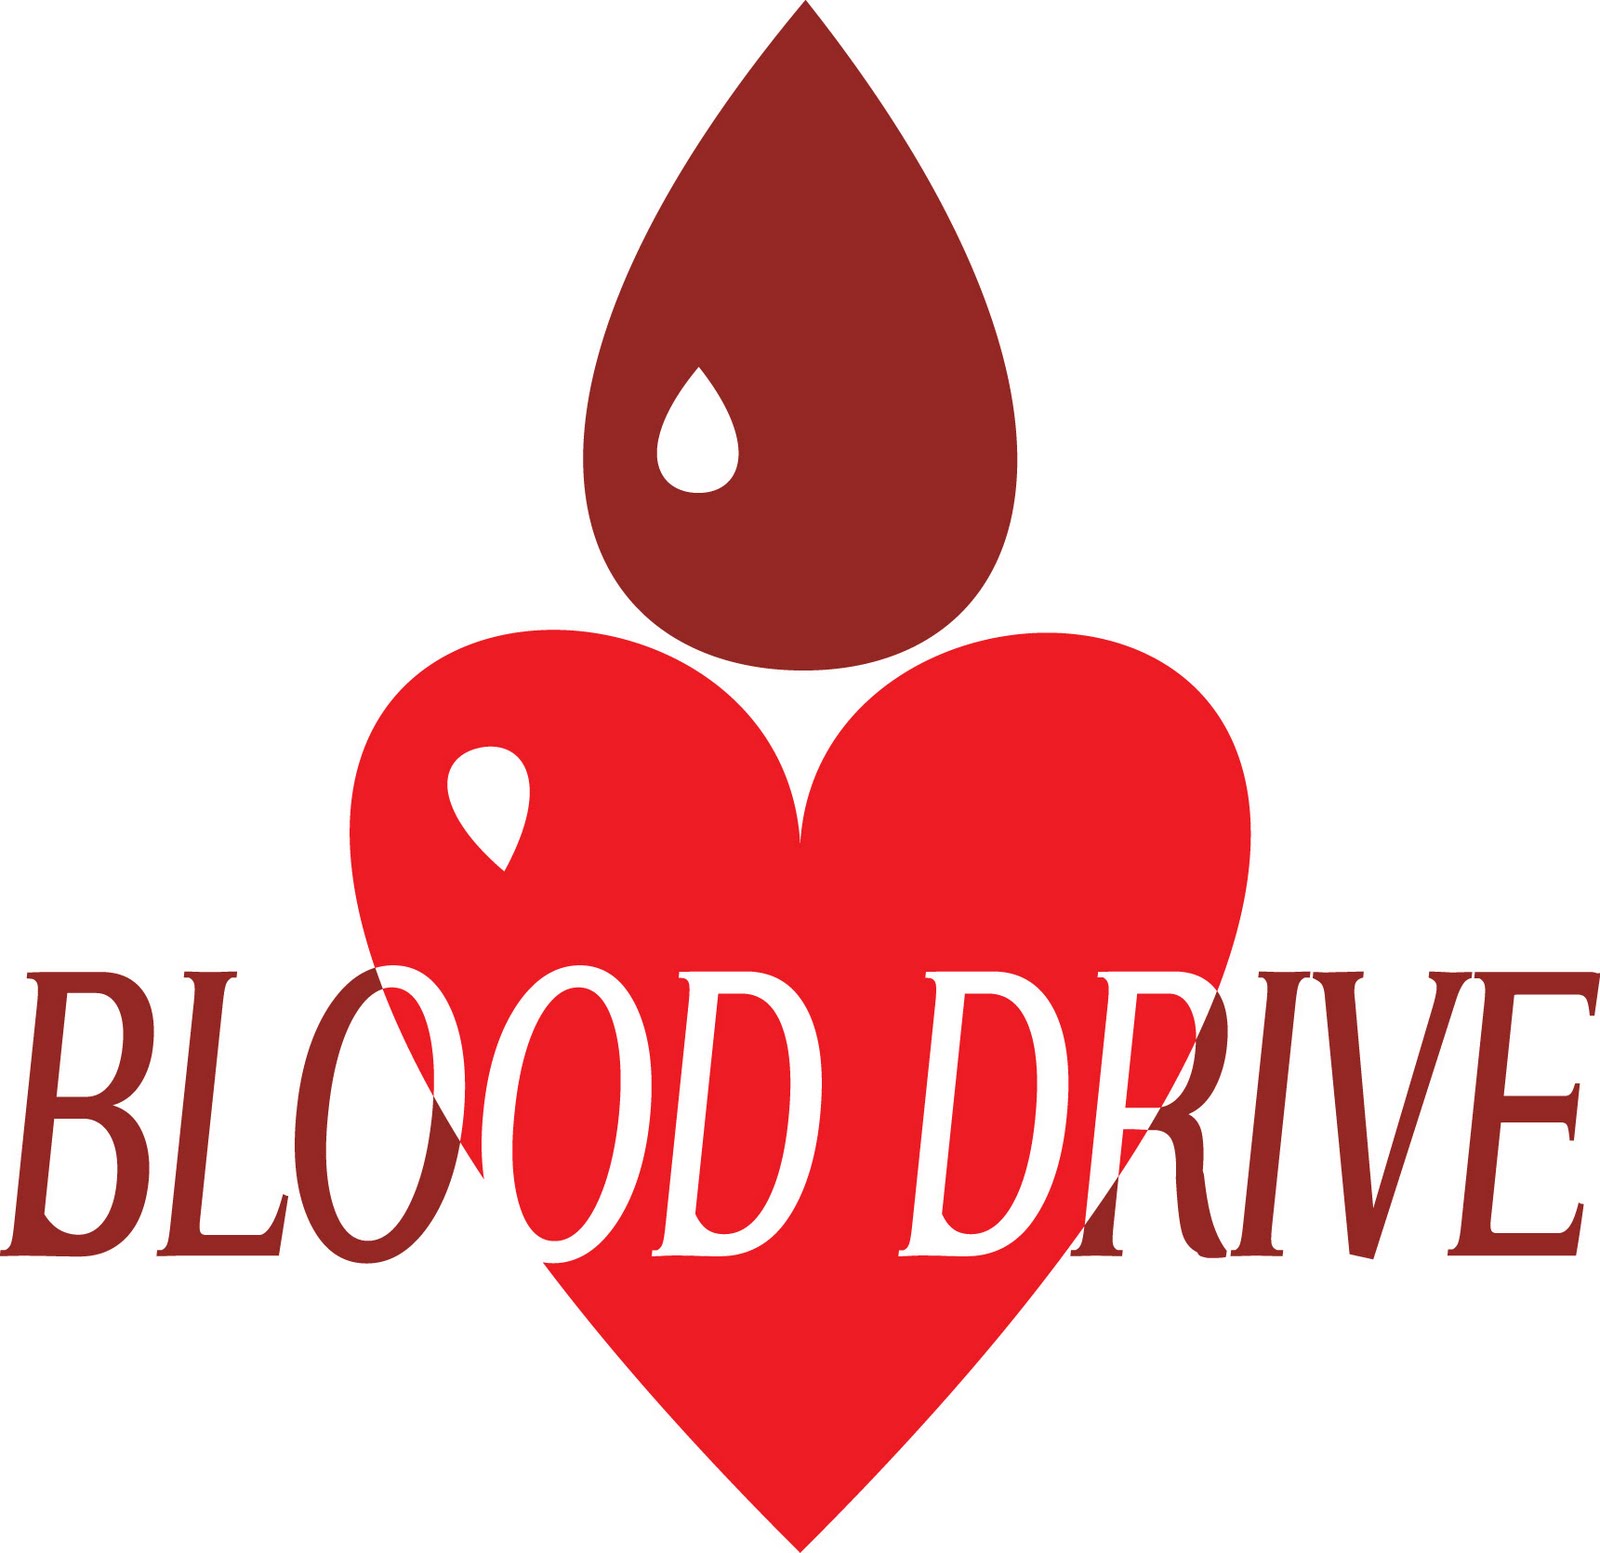 blood donation clipart - photo #19